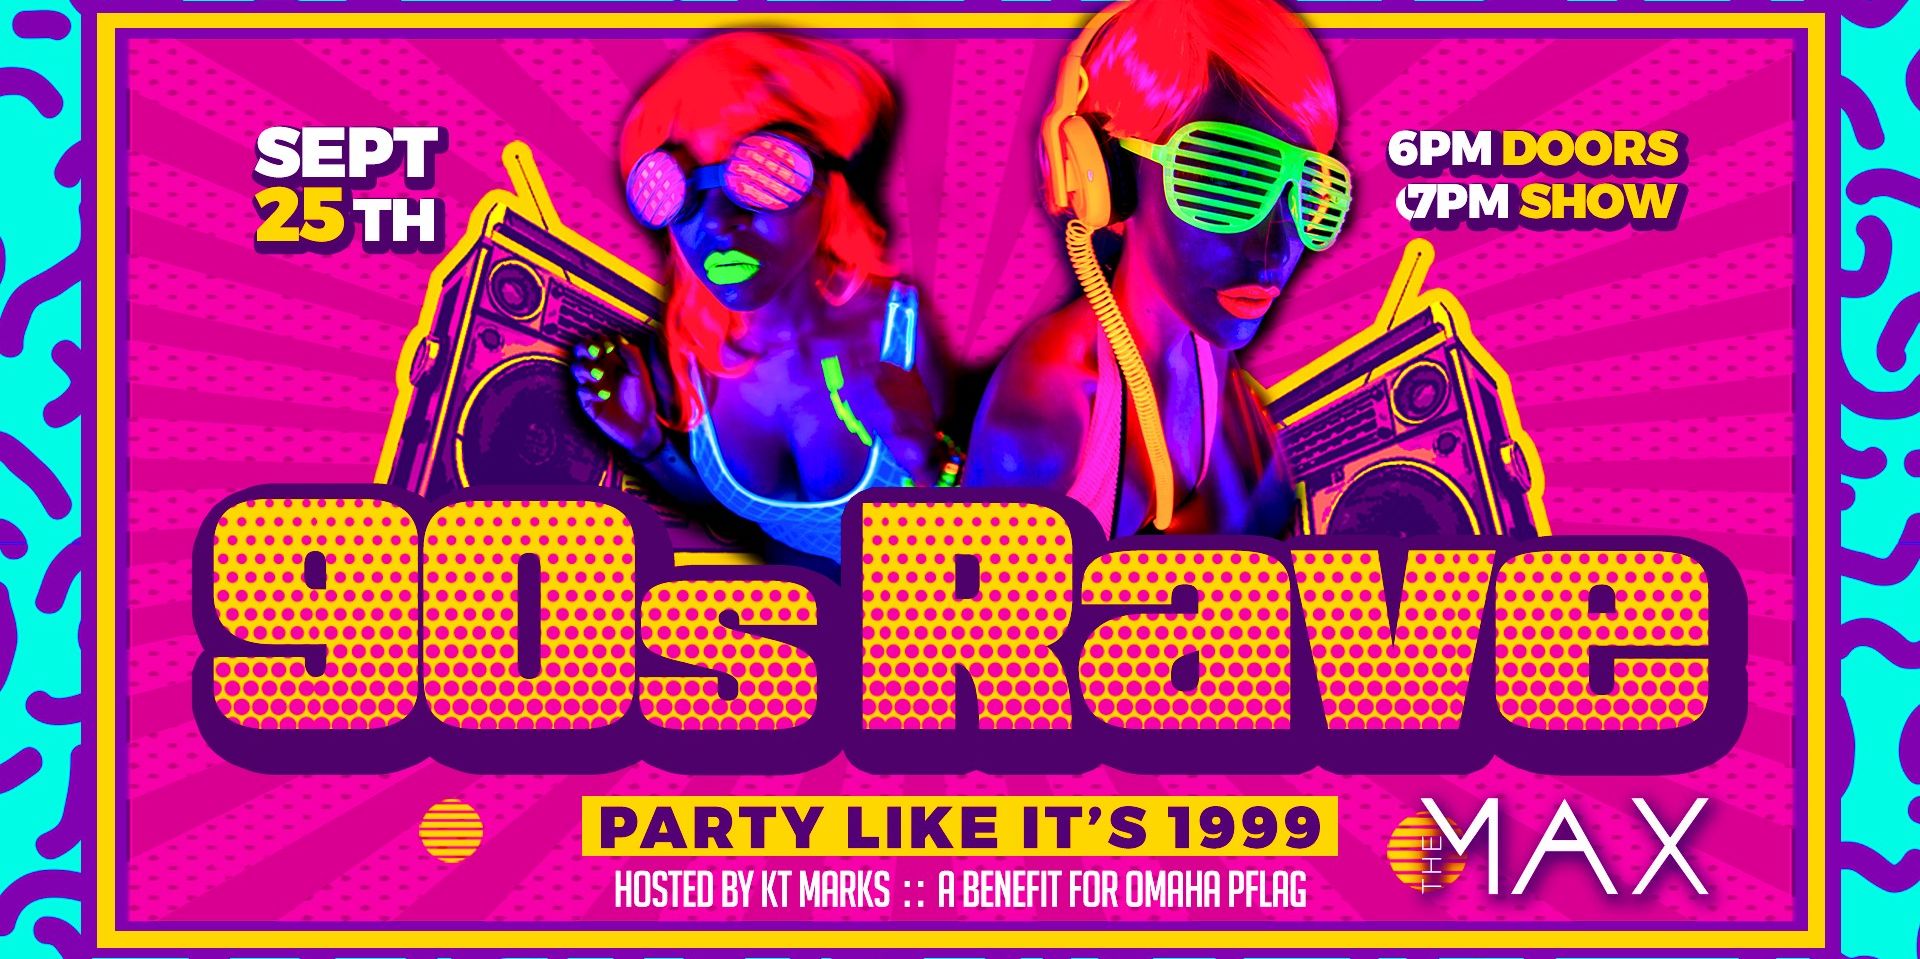 90s Rave Party promotional image